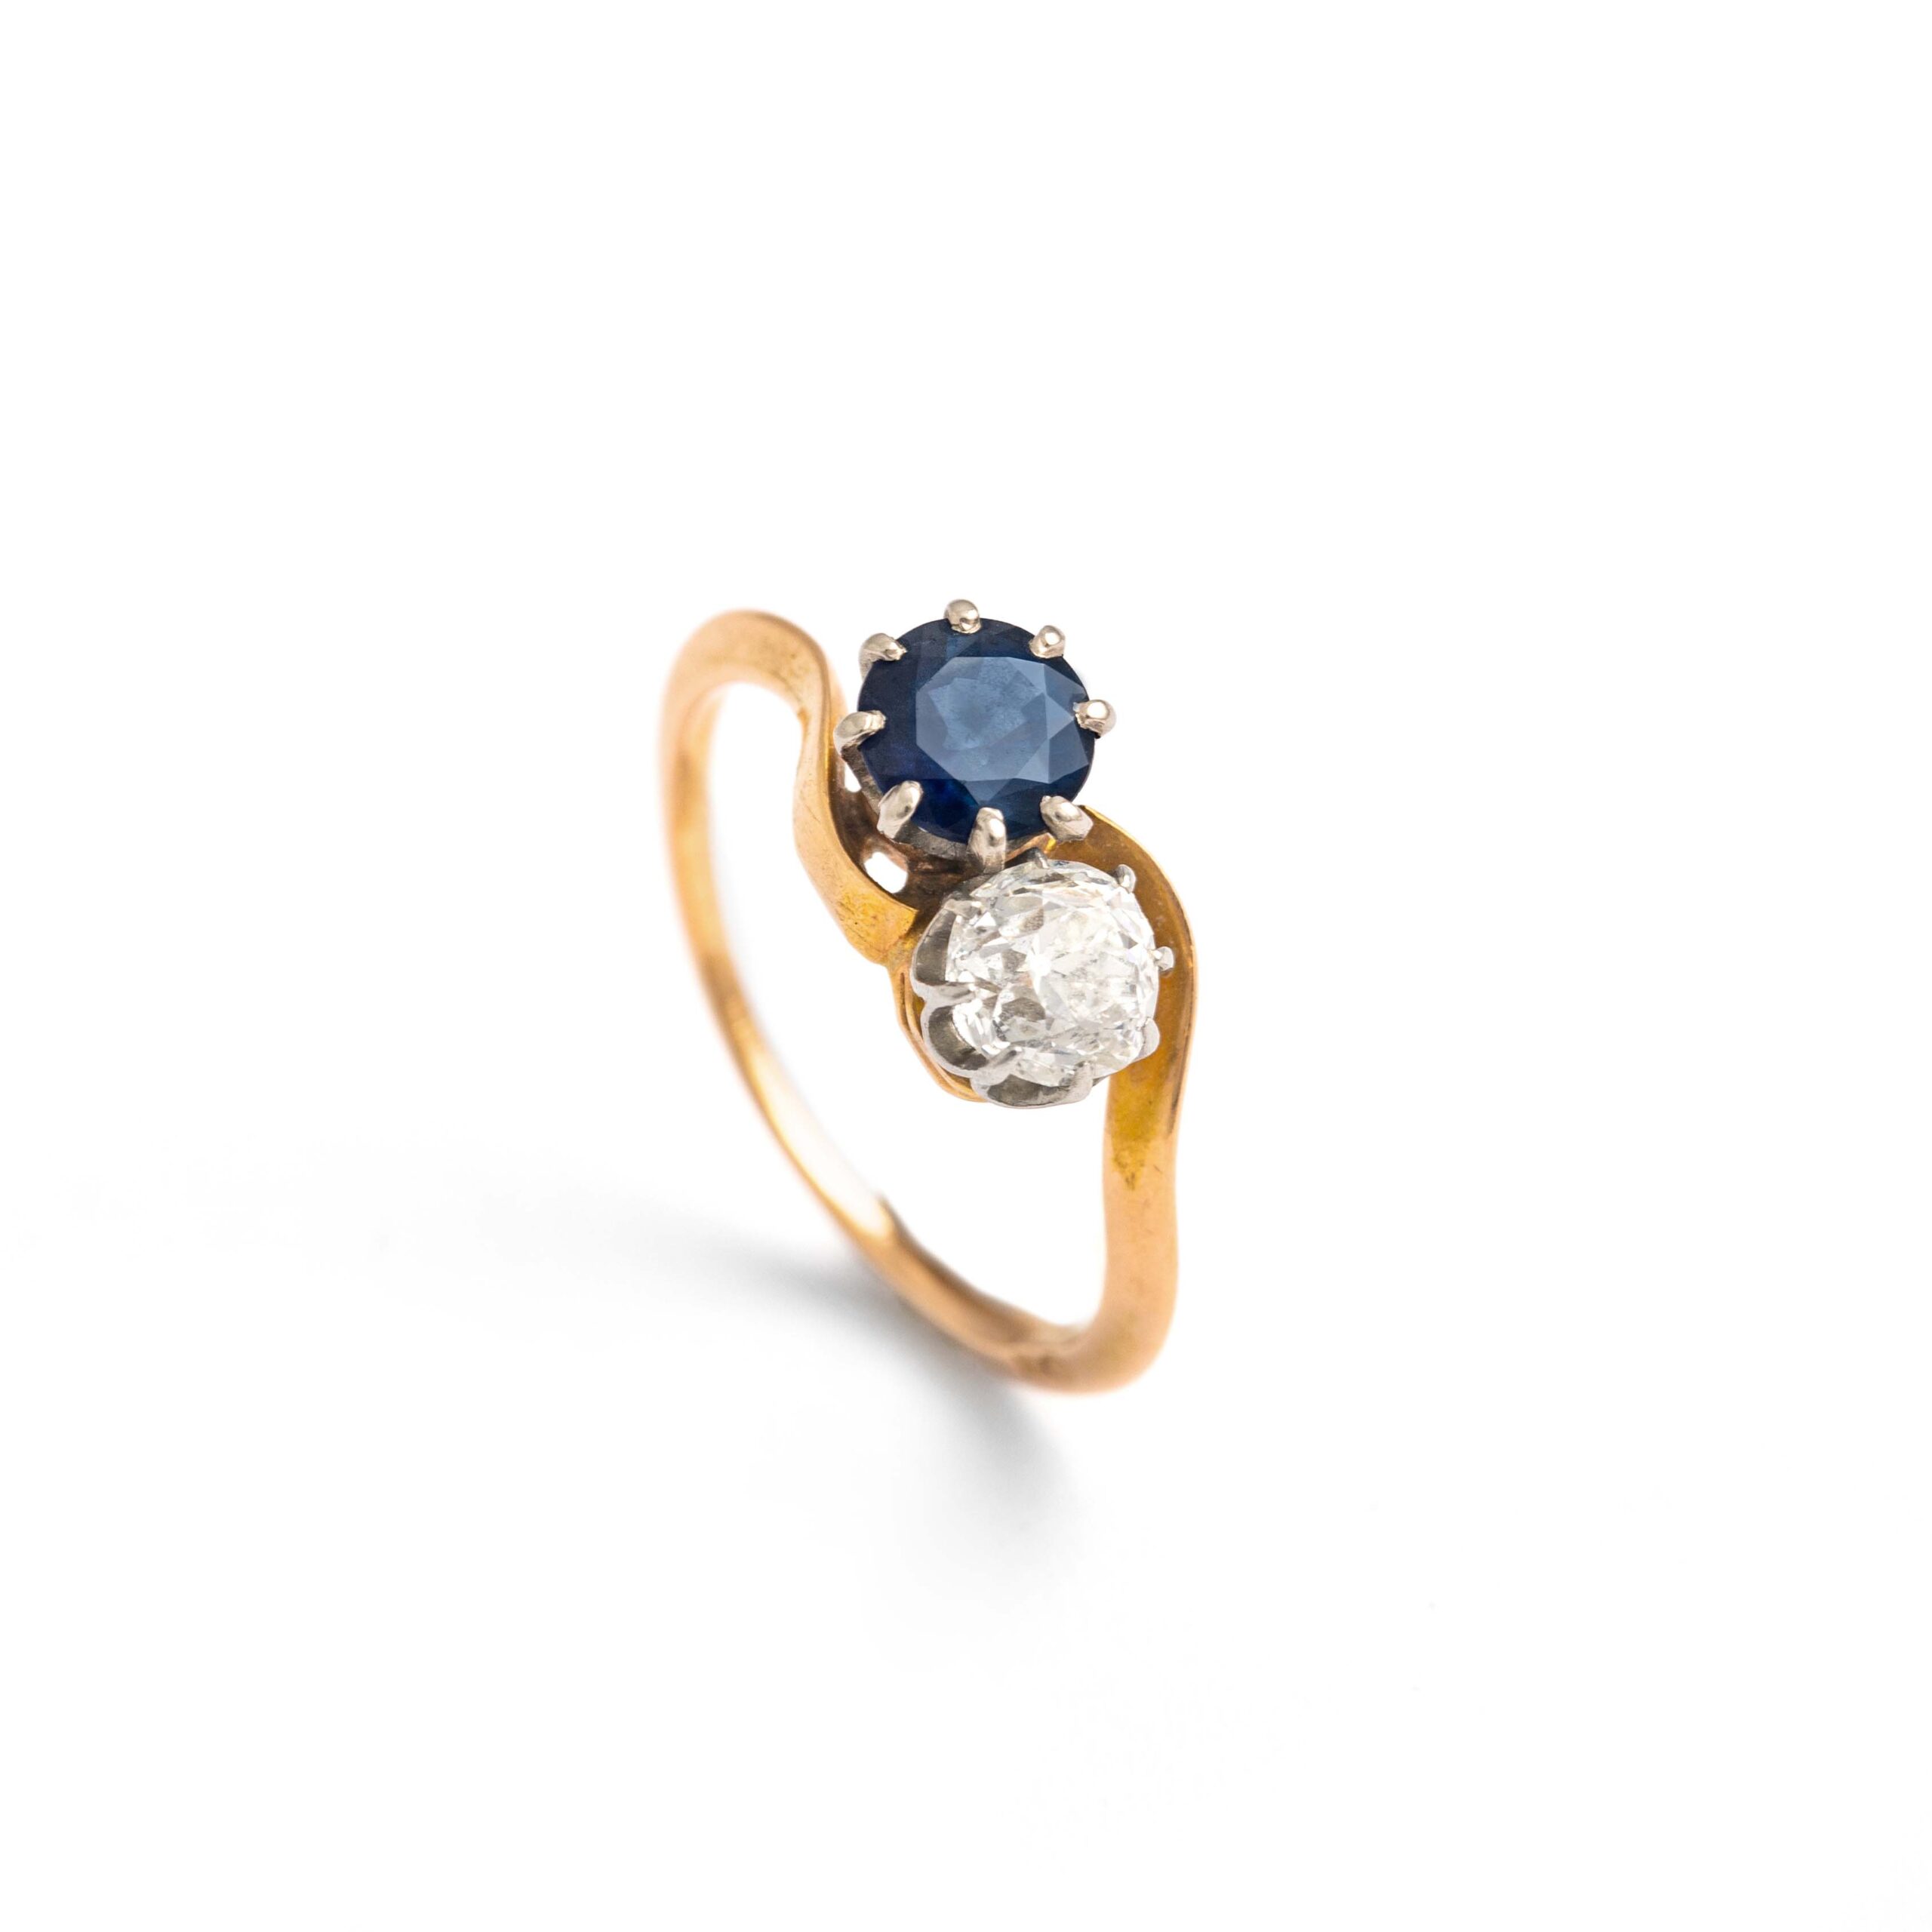 Diamond and Blue Sapphire (not tested) "Toi et Moi" Crossover Gold Antique Ring. Early 20th Century. Size: 52. Weight: 2.44 grams.